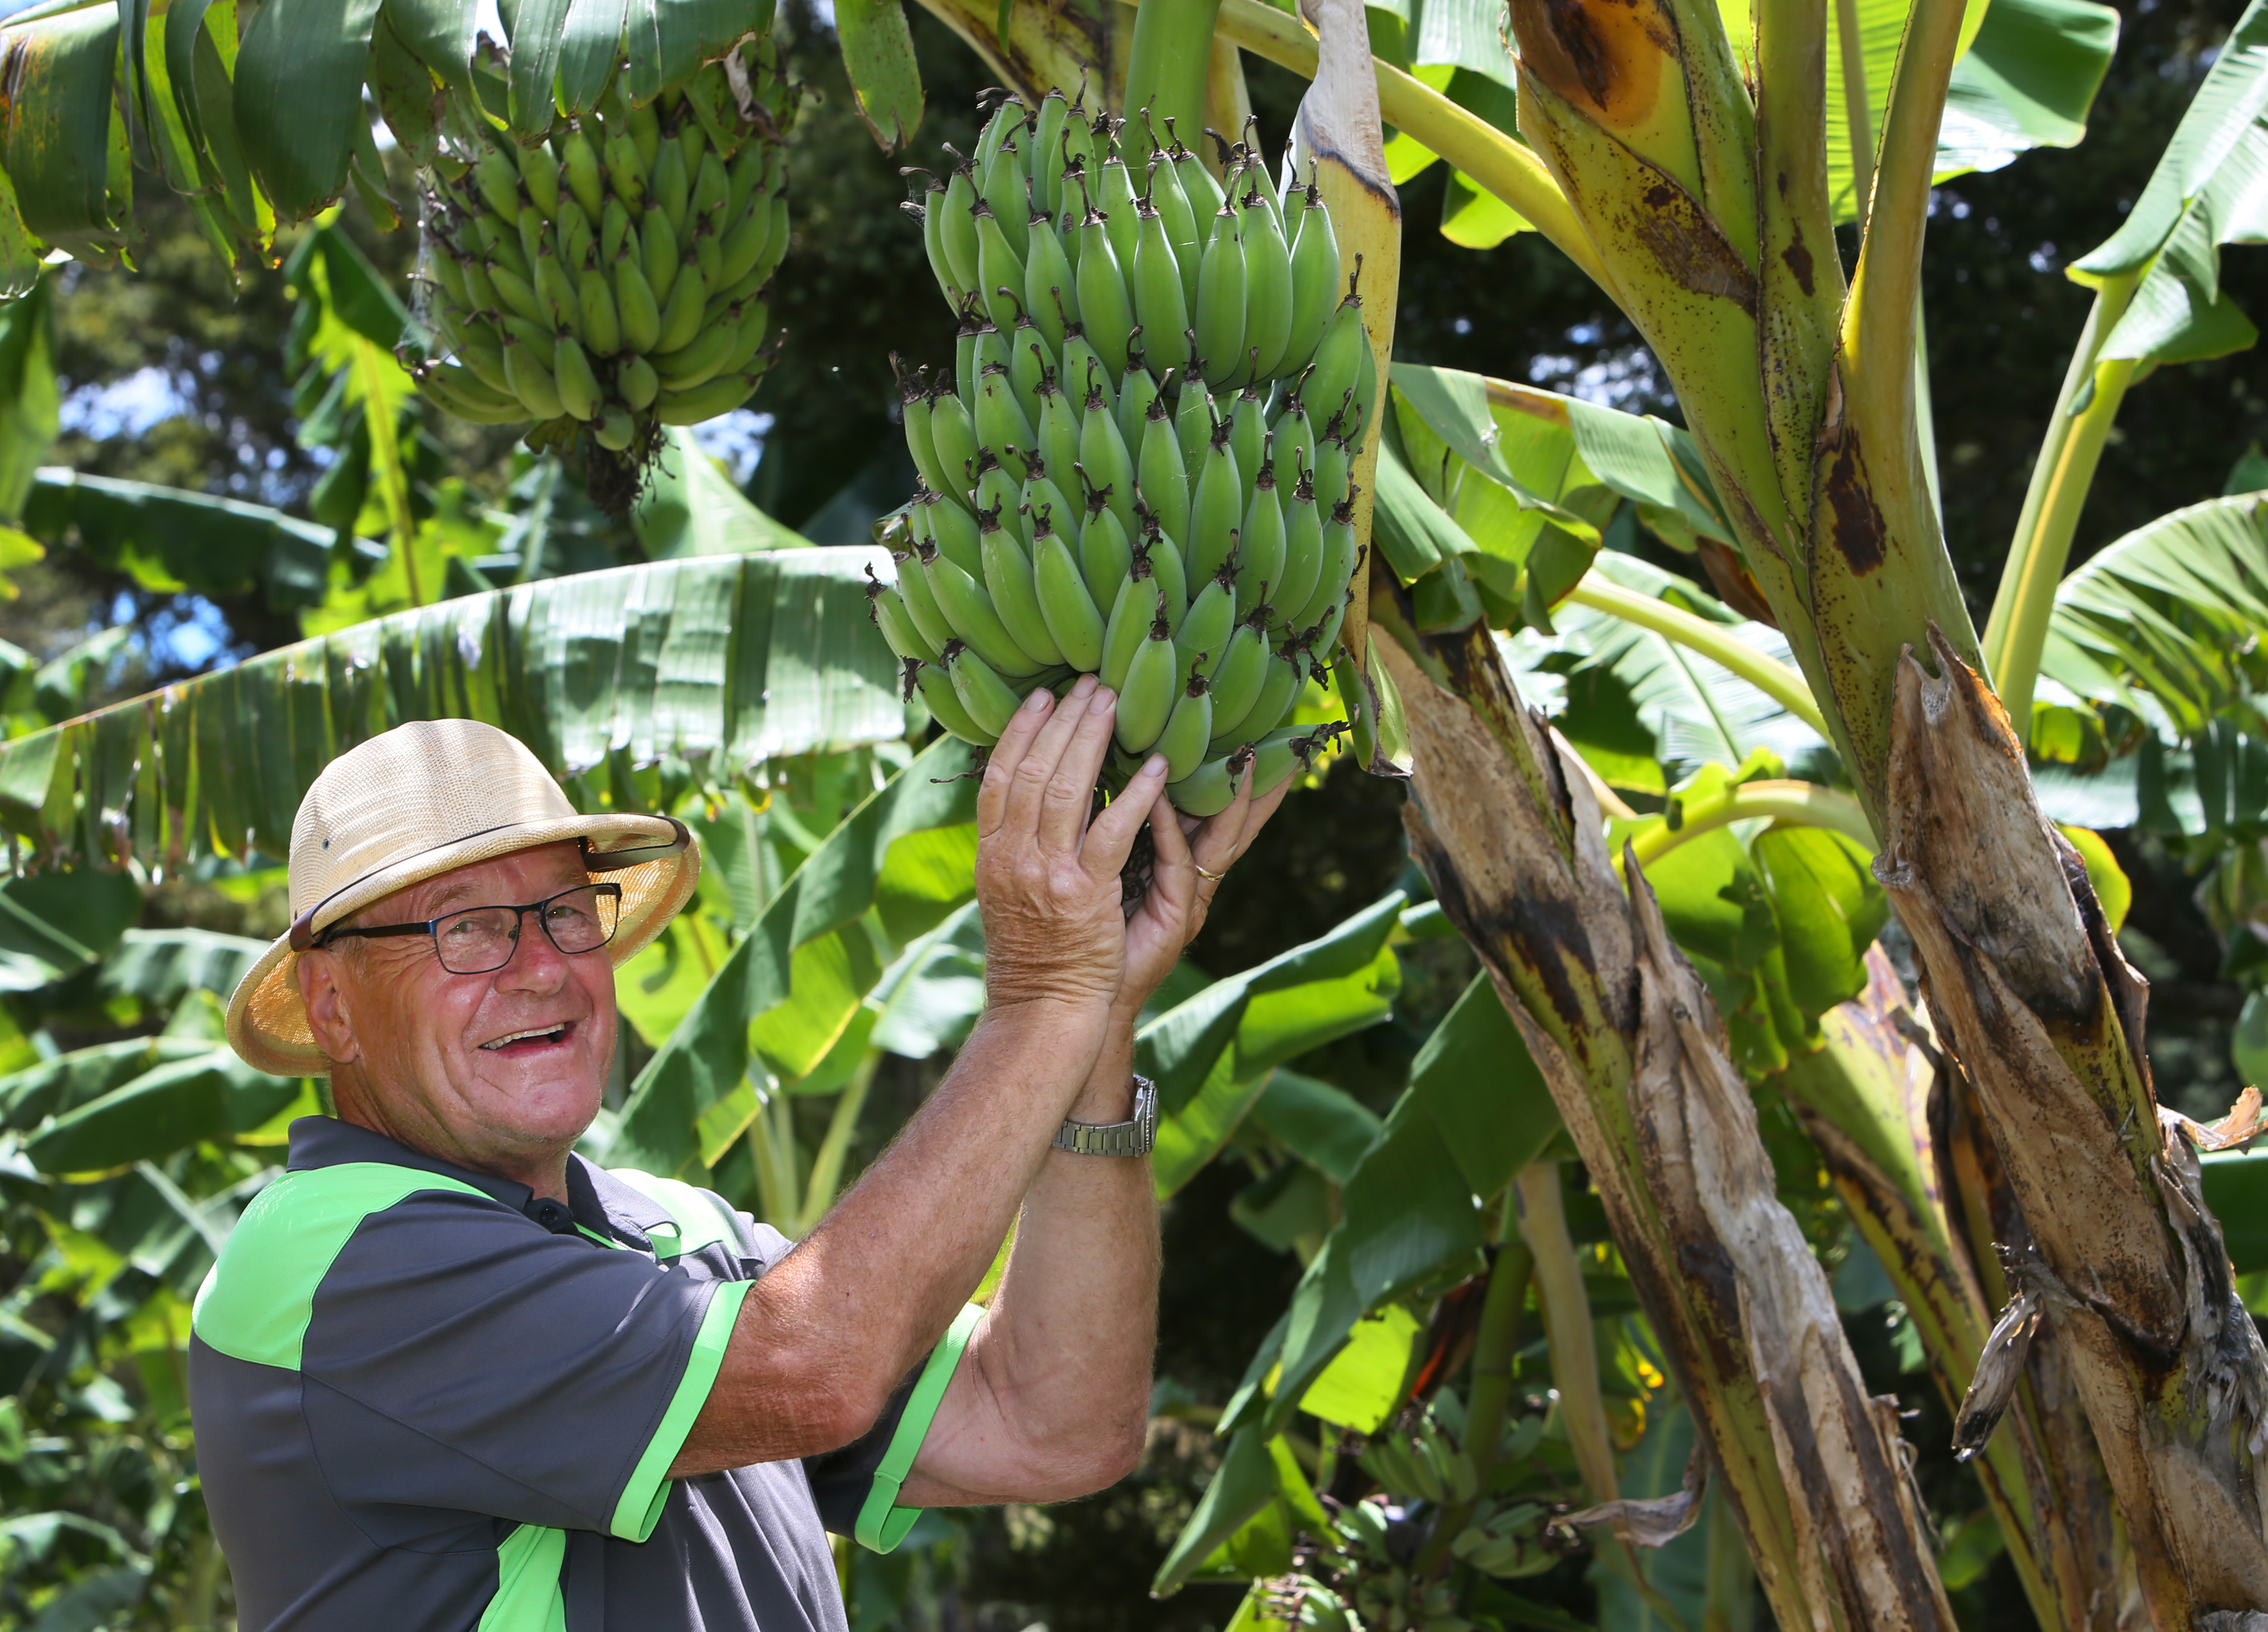 Blue Banana Farming Tips: From Planting to Harvesting